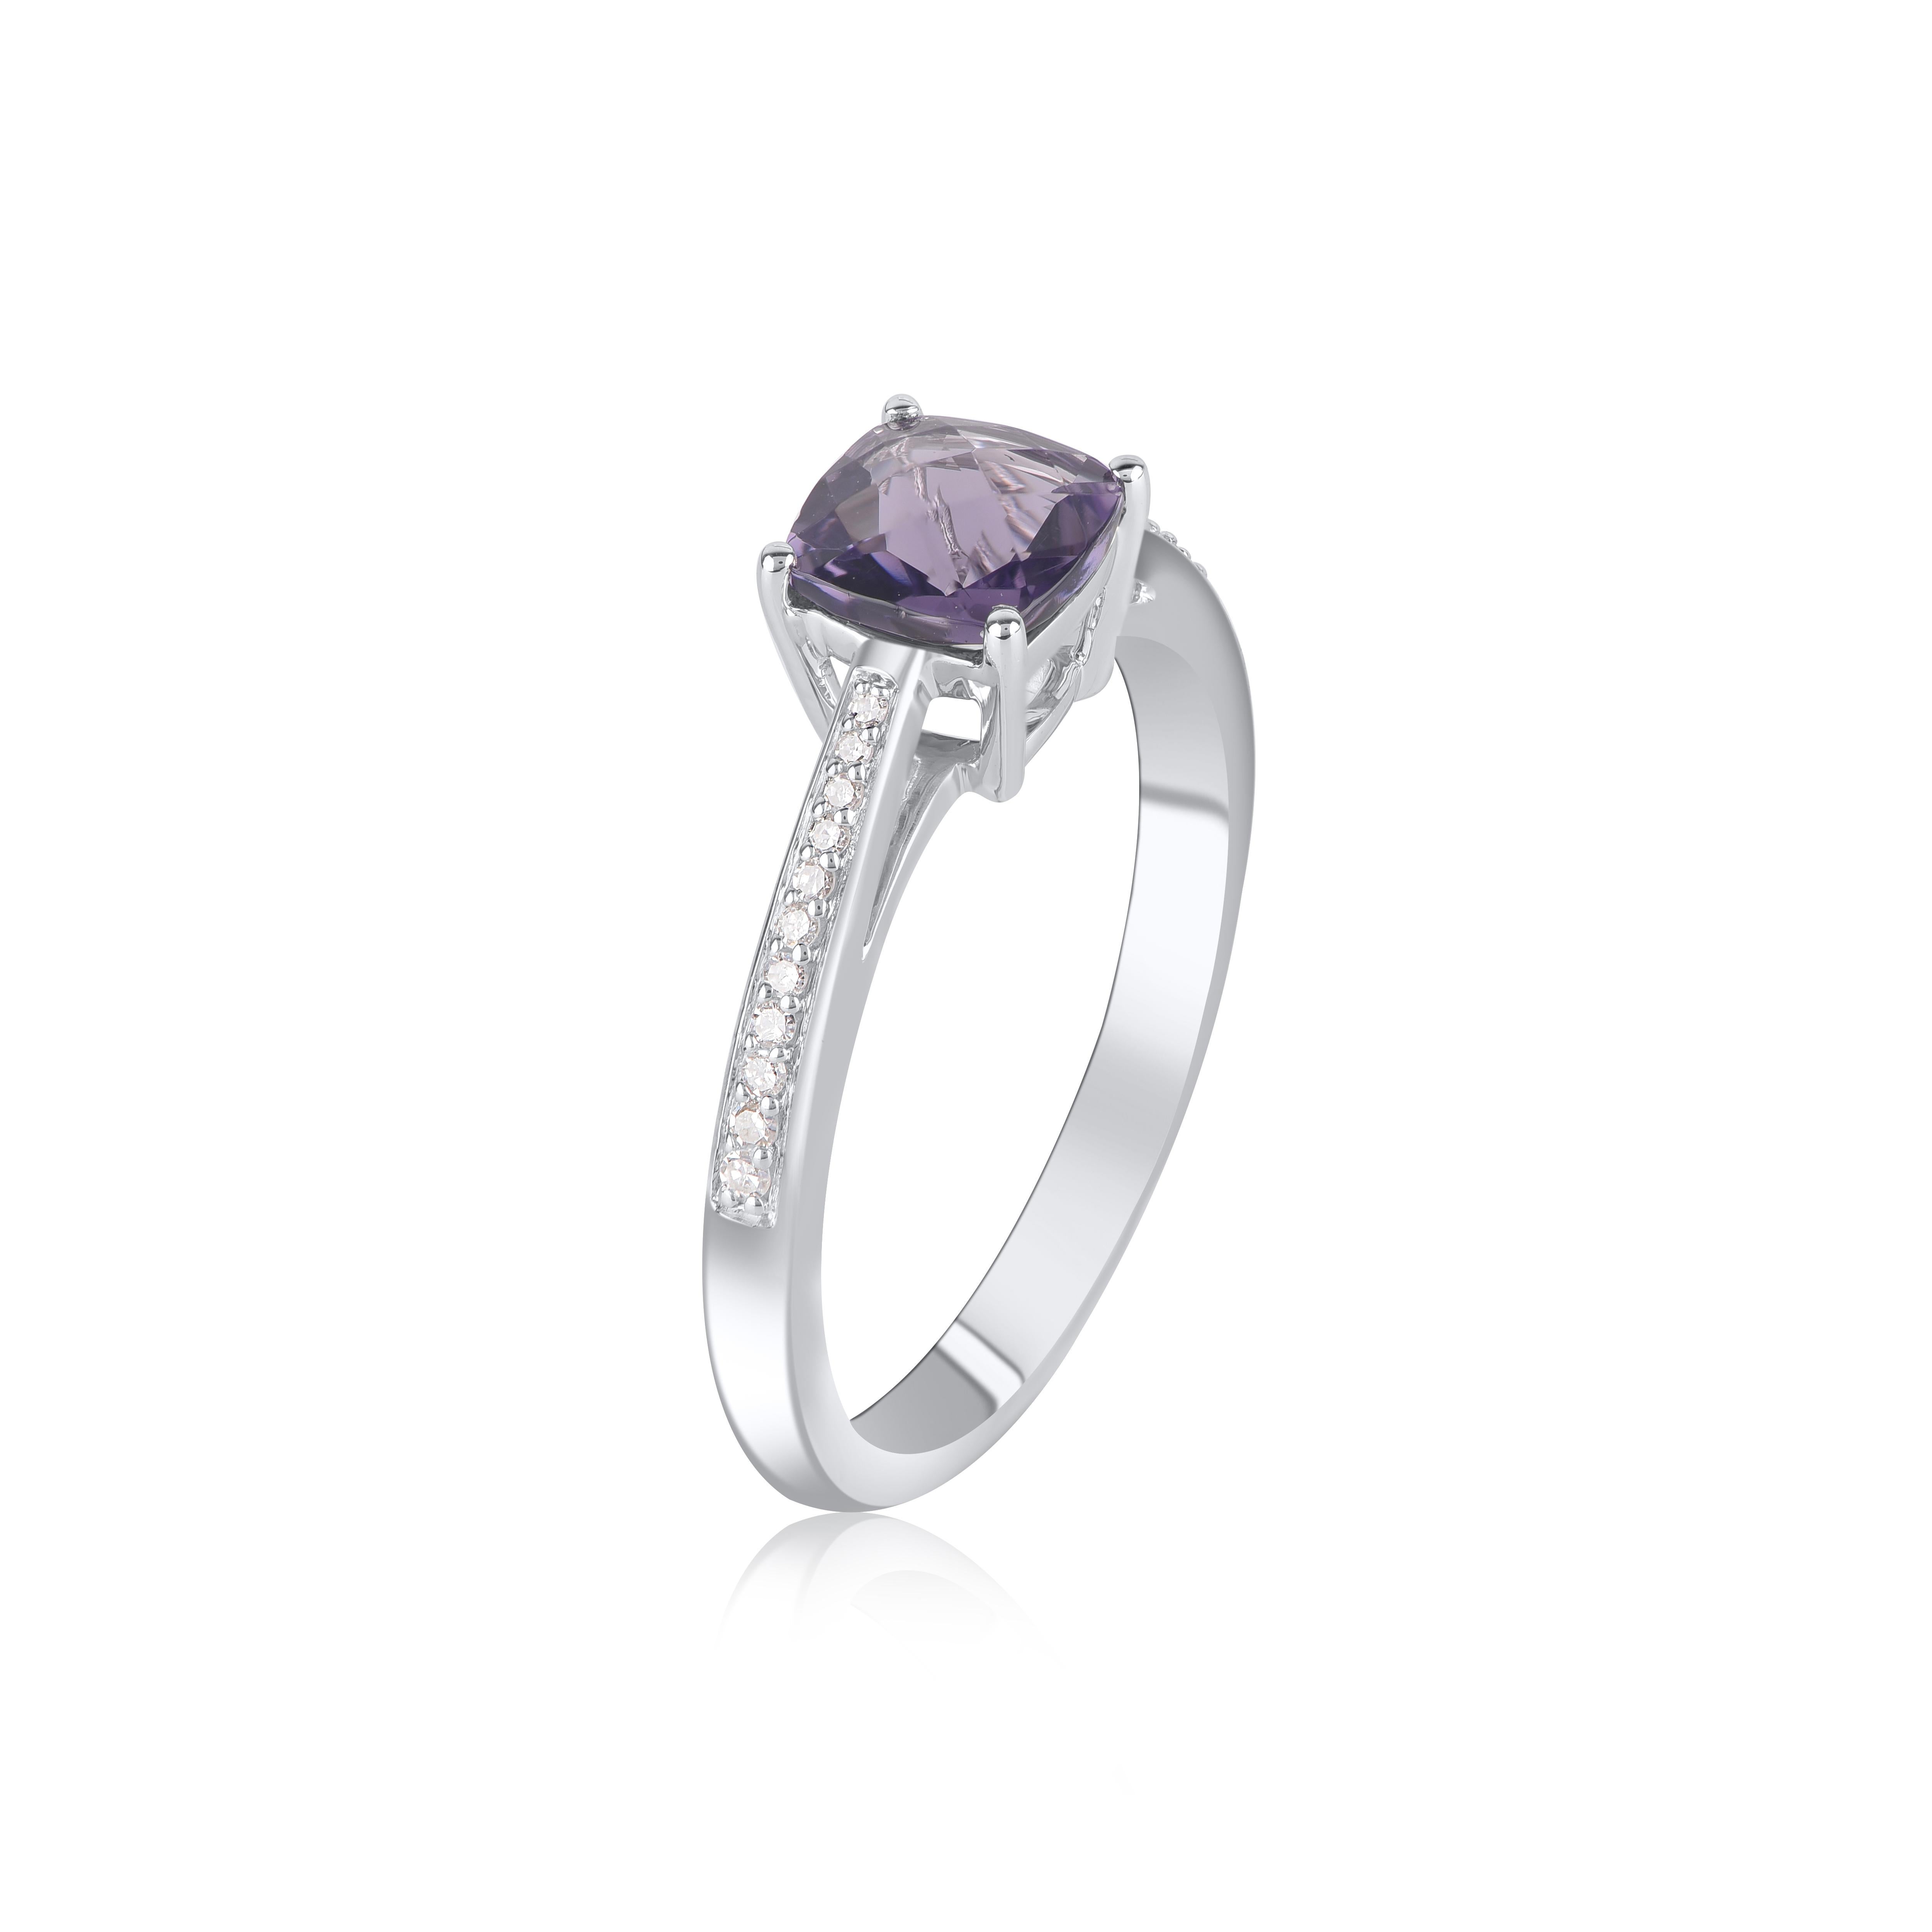 Contemporary TJD 0.85 Carat Round & Cushion Cut Amethyst 14 Karat White Gold Solitaire Ring For Sale